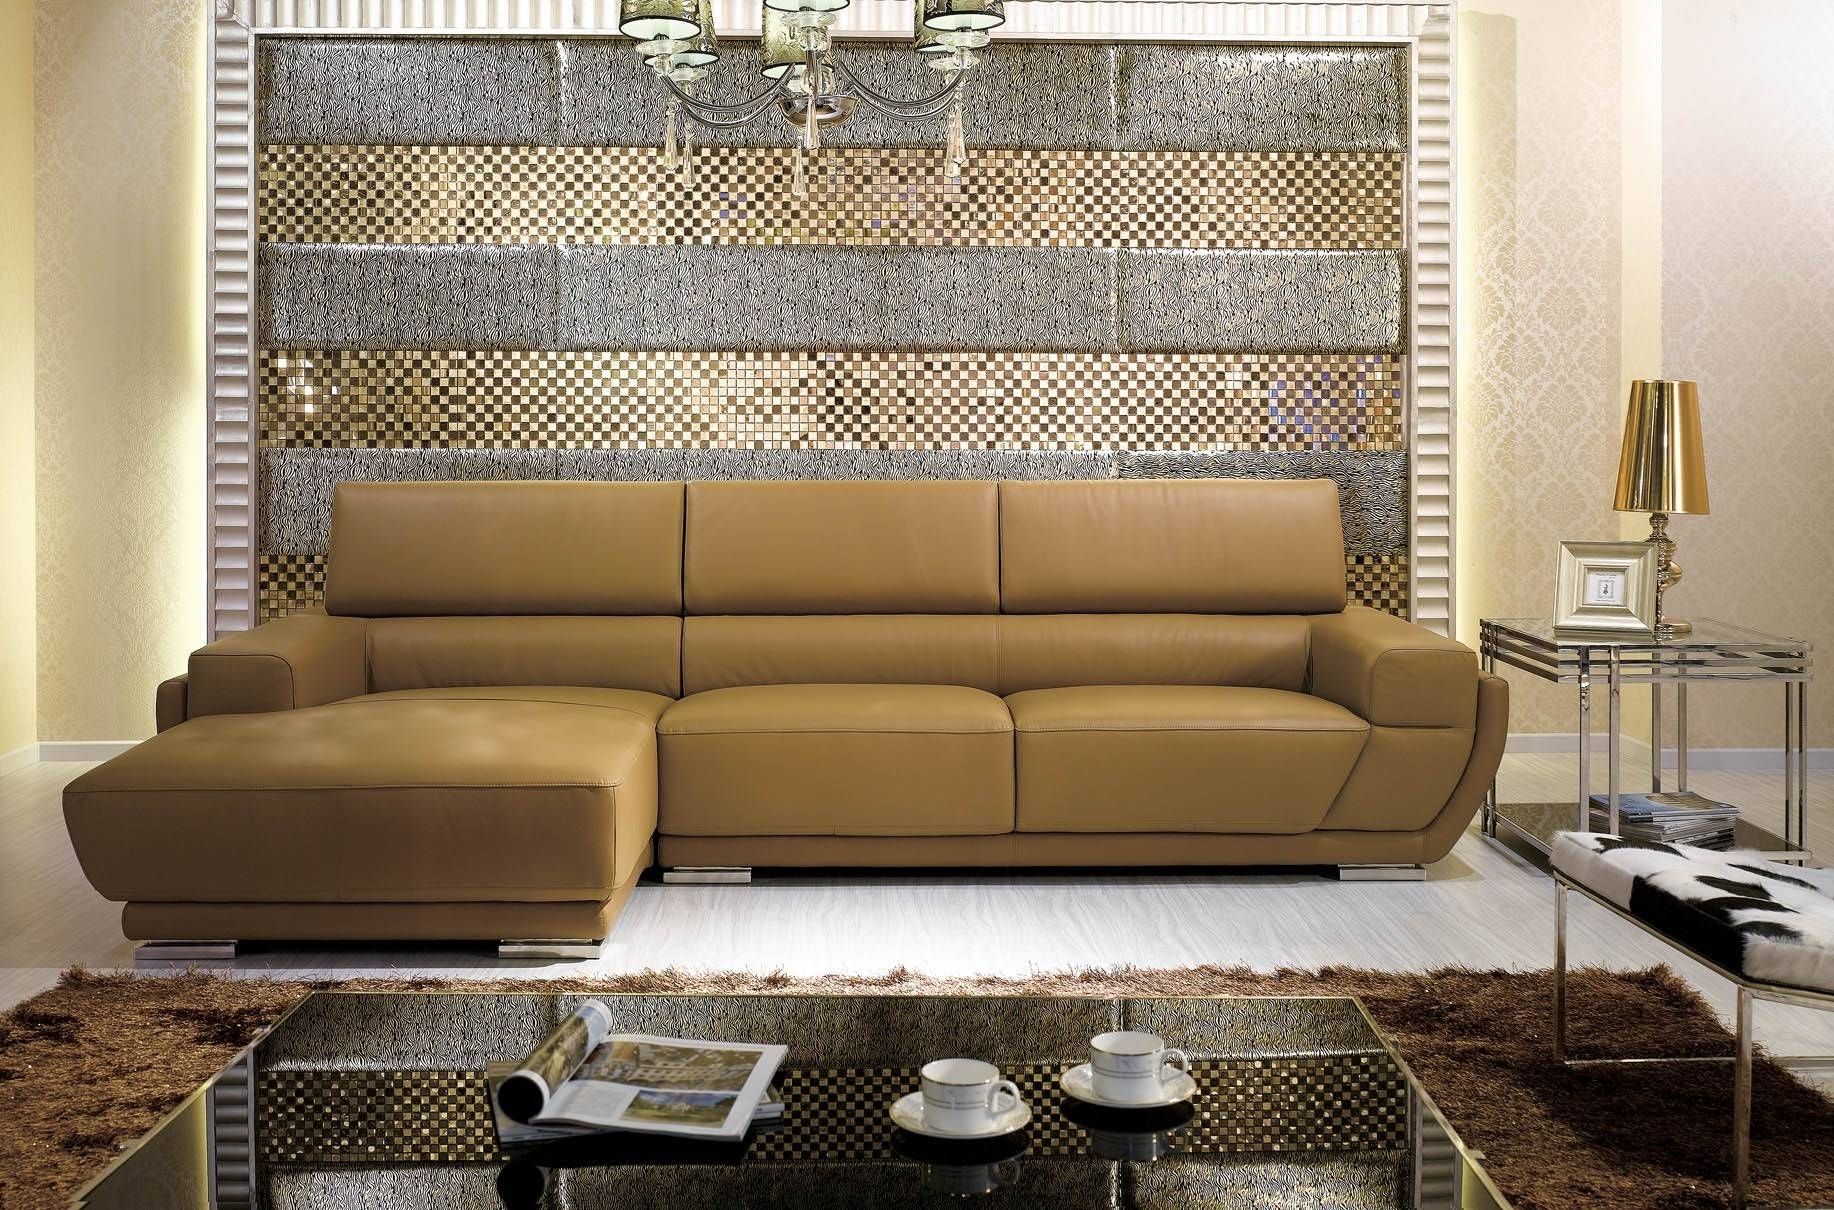 K8300 Modern Camel Italian Leather Sectional Sofa With Camel Sectional Sofa (View 11 of 30)